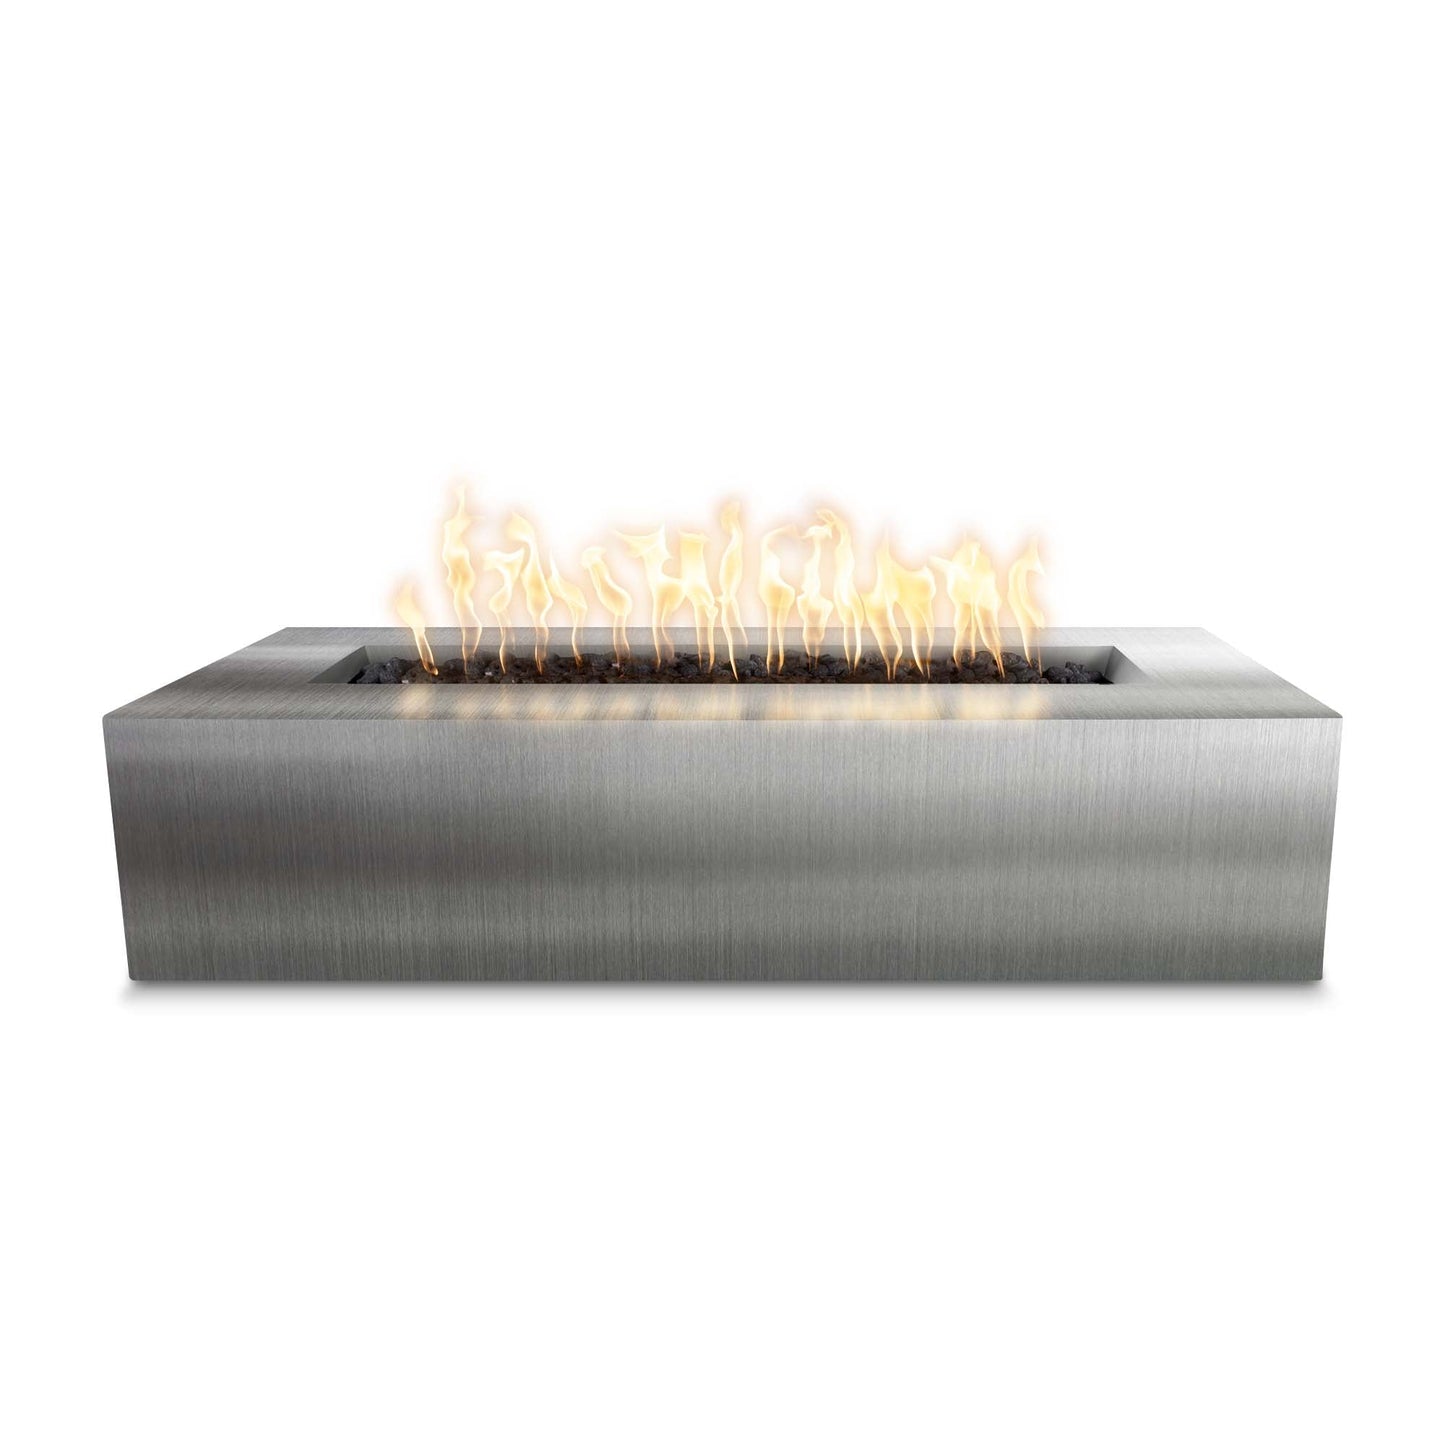 The Outdoor Plus Rectangular Regal 48" Hammered Copper Natural Gas Fire Pit with 12V Electronic Ignition